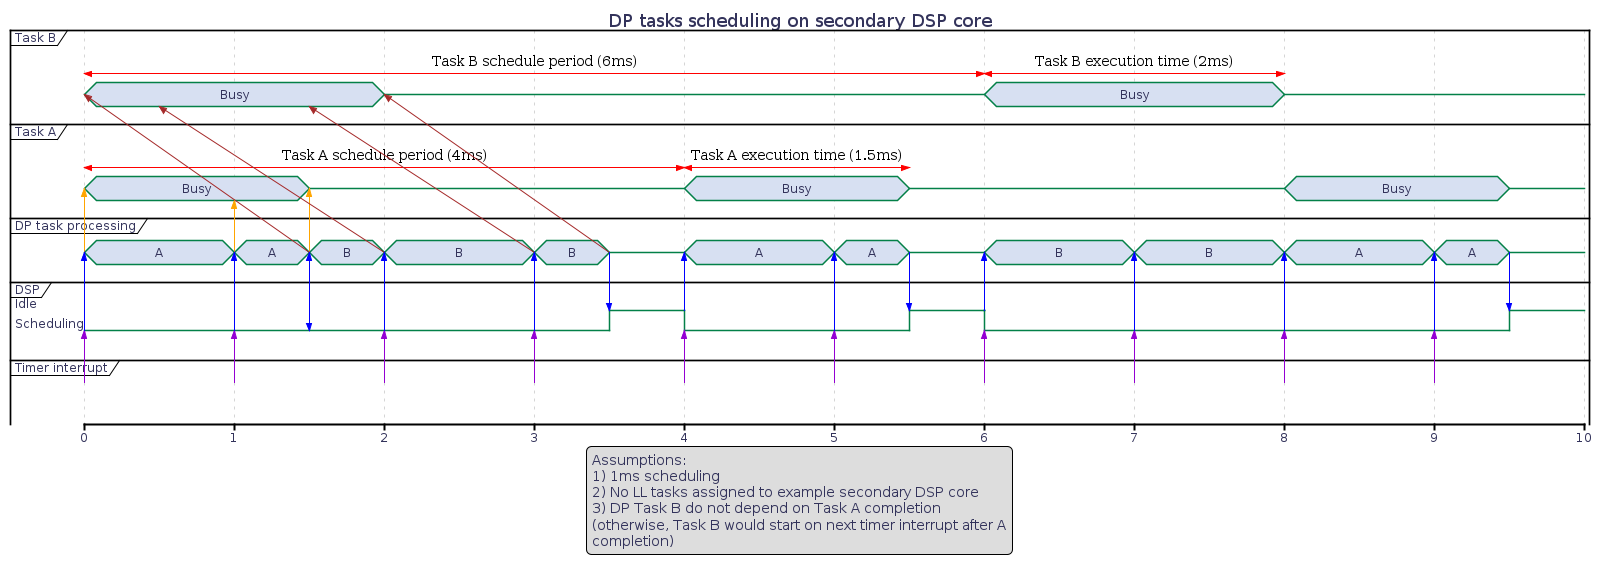 @startuml

Title DP tasks scheduling on secondary DSP core

legend
Assumptions:
1) 1ms scheduling
2) No LL tasks assigned to example secondary DSP core
3) DP Task B do not depend on Task A completion
(otherwise, Task B would start on next timer interrupt after A
completion)
end legend

scale 1 as 150 pixels

concise "Task B" as Task_B
concise "Task A" as Task_A

concise "DP task processing" as DP_Processing
robust "DSP" as DSP
concise "Timer interrupt" as Interrupt


@Task_A
0 is Busy
1.5 is {-}

4 is Busy
5.5 is {-}

8 is Busy
9.5 is {-}

@0 <-> @4: Task A schedule period (4ms)
@4 <-> @5.5: Task A execution time (1.5ms)

DP_Processing@0 -[#Orange]> Task_A@0
DP_Processing@1 -[#Orange]> Task_A@1
DP_Processing@1.5 -[#Orange]> Task_A@1.5


@Task_B
0 is Busy
2 is {-}

6 is Busy
8 is {-}

@0 <-> @6: Task B schedule period (6ms)
@6 <-> @8: Task B execution time (2ms)

DP_Processing@1.5 -[#Brown]> Task_B@0
DP_Processing@2 -[#Brown]> Task_B@0.5
DP_Processing@3 -[#Brown]> Task_B@1.5
DP_Processing@3.5 -[#Brown]> Task_B@2

DSP is Idle
DP_Processing is {-}

@0
DP_Processing is "A"

@0
Interrupt -[#DarkViolet]> DSP
DSP -> DP_Processing
DSP is "Scheduling"
DP_Processing is "A"

@1
Interrupt -[#DarkViolet]> DSP
DSP -> DP_Processing
DP_Processing is "A"

@1.5
DP_Processing -> DSP
DSP -> DP_Processing
DP_Processing is "B"

@2
Interrupt -[#DarkViolet]> DSP
DSP -> DP_Processing
DP_Processing is "B"

@3
Interrupt -[#DarkViolet]> DSP
DSP -> DP_Processing
DP_Processing is "B"

@3.5
DP_Processing -> DSP
DSP is Idle
DP_Processing is {-}

@4
Interrupt -[#DarkViolet]> DSP
DSP is "Scheduling"
DSP -> DP_Processing
DP_Processing is "A"

@5
Interrupt -[#DarkViolet]> DSP
DSP -> DP_Processing
DP_Processing is "A"

@5.5
DP_Processing -> DSP
DSP is Idle
DP_Processing is {-}

@6.001
Interrupt -[#DarkViolet]> DSP
DSP -> DP_Processing
DSP is "Scheduling"
DP_Processing is "B"

@7.001
Interrupt -[#DarkViolet]> DSP
DSP -> DP_Processing
DP_Processing is "B"

@8.001
Interrupt -[#DarkViolet]> DSP
DSP -> DP_Processing
DP_Processing is "A"

@9.001
Interrupt -[#DarkViolet]> DSP
DSP -> DP_Processing
DP_Processing is "A"

@9.5
DP_Processing -> DSP
DSP is Idle
DP_Processing is {-}

@enduml
